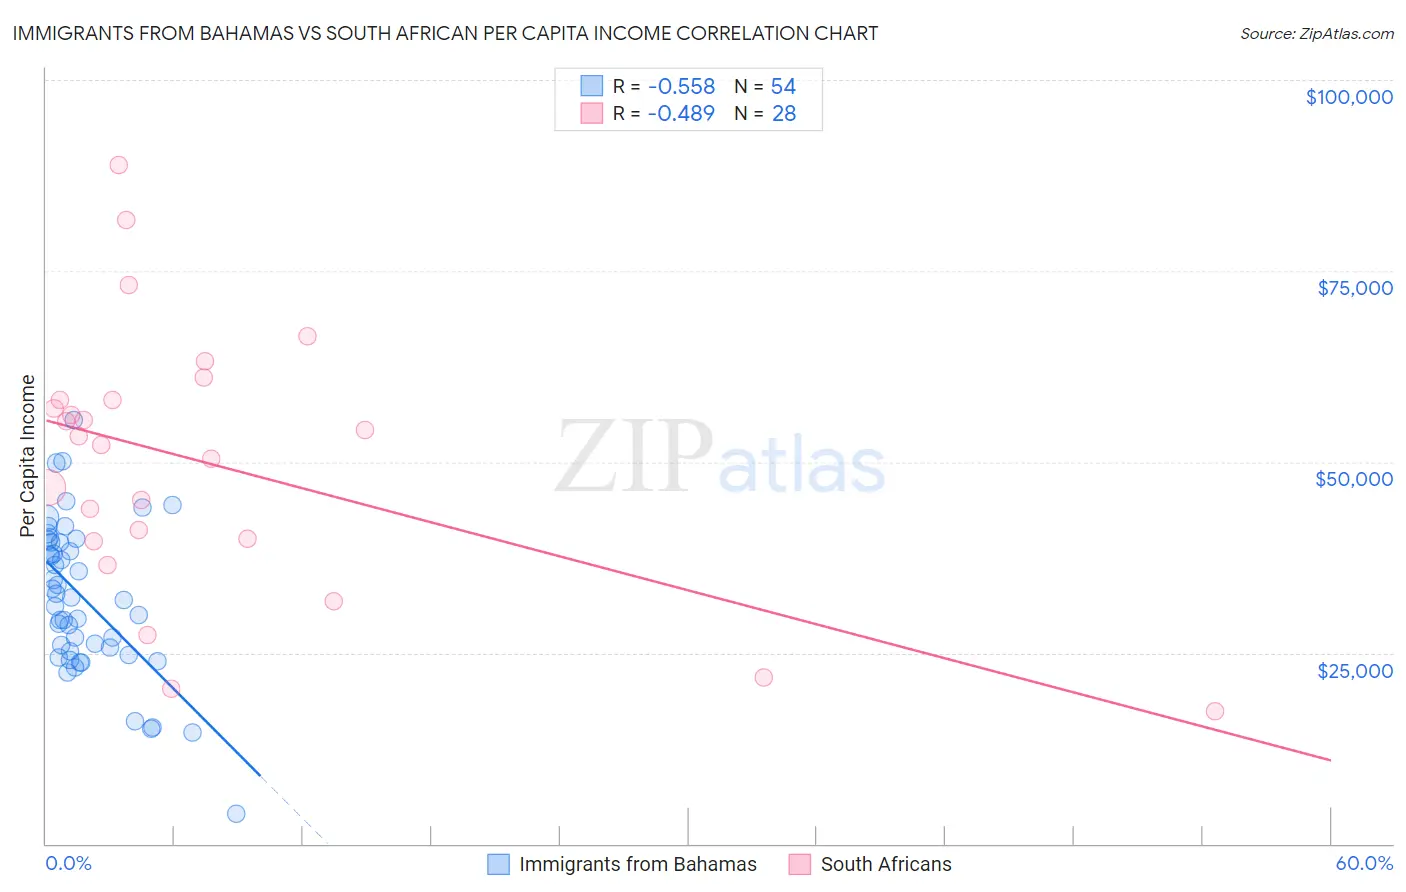 Immigrants from Bahamas vs South African Per Capita Income